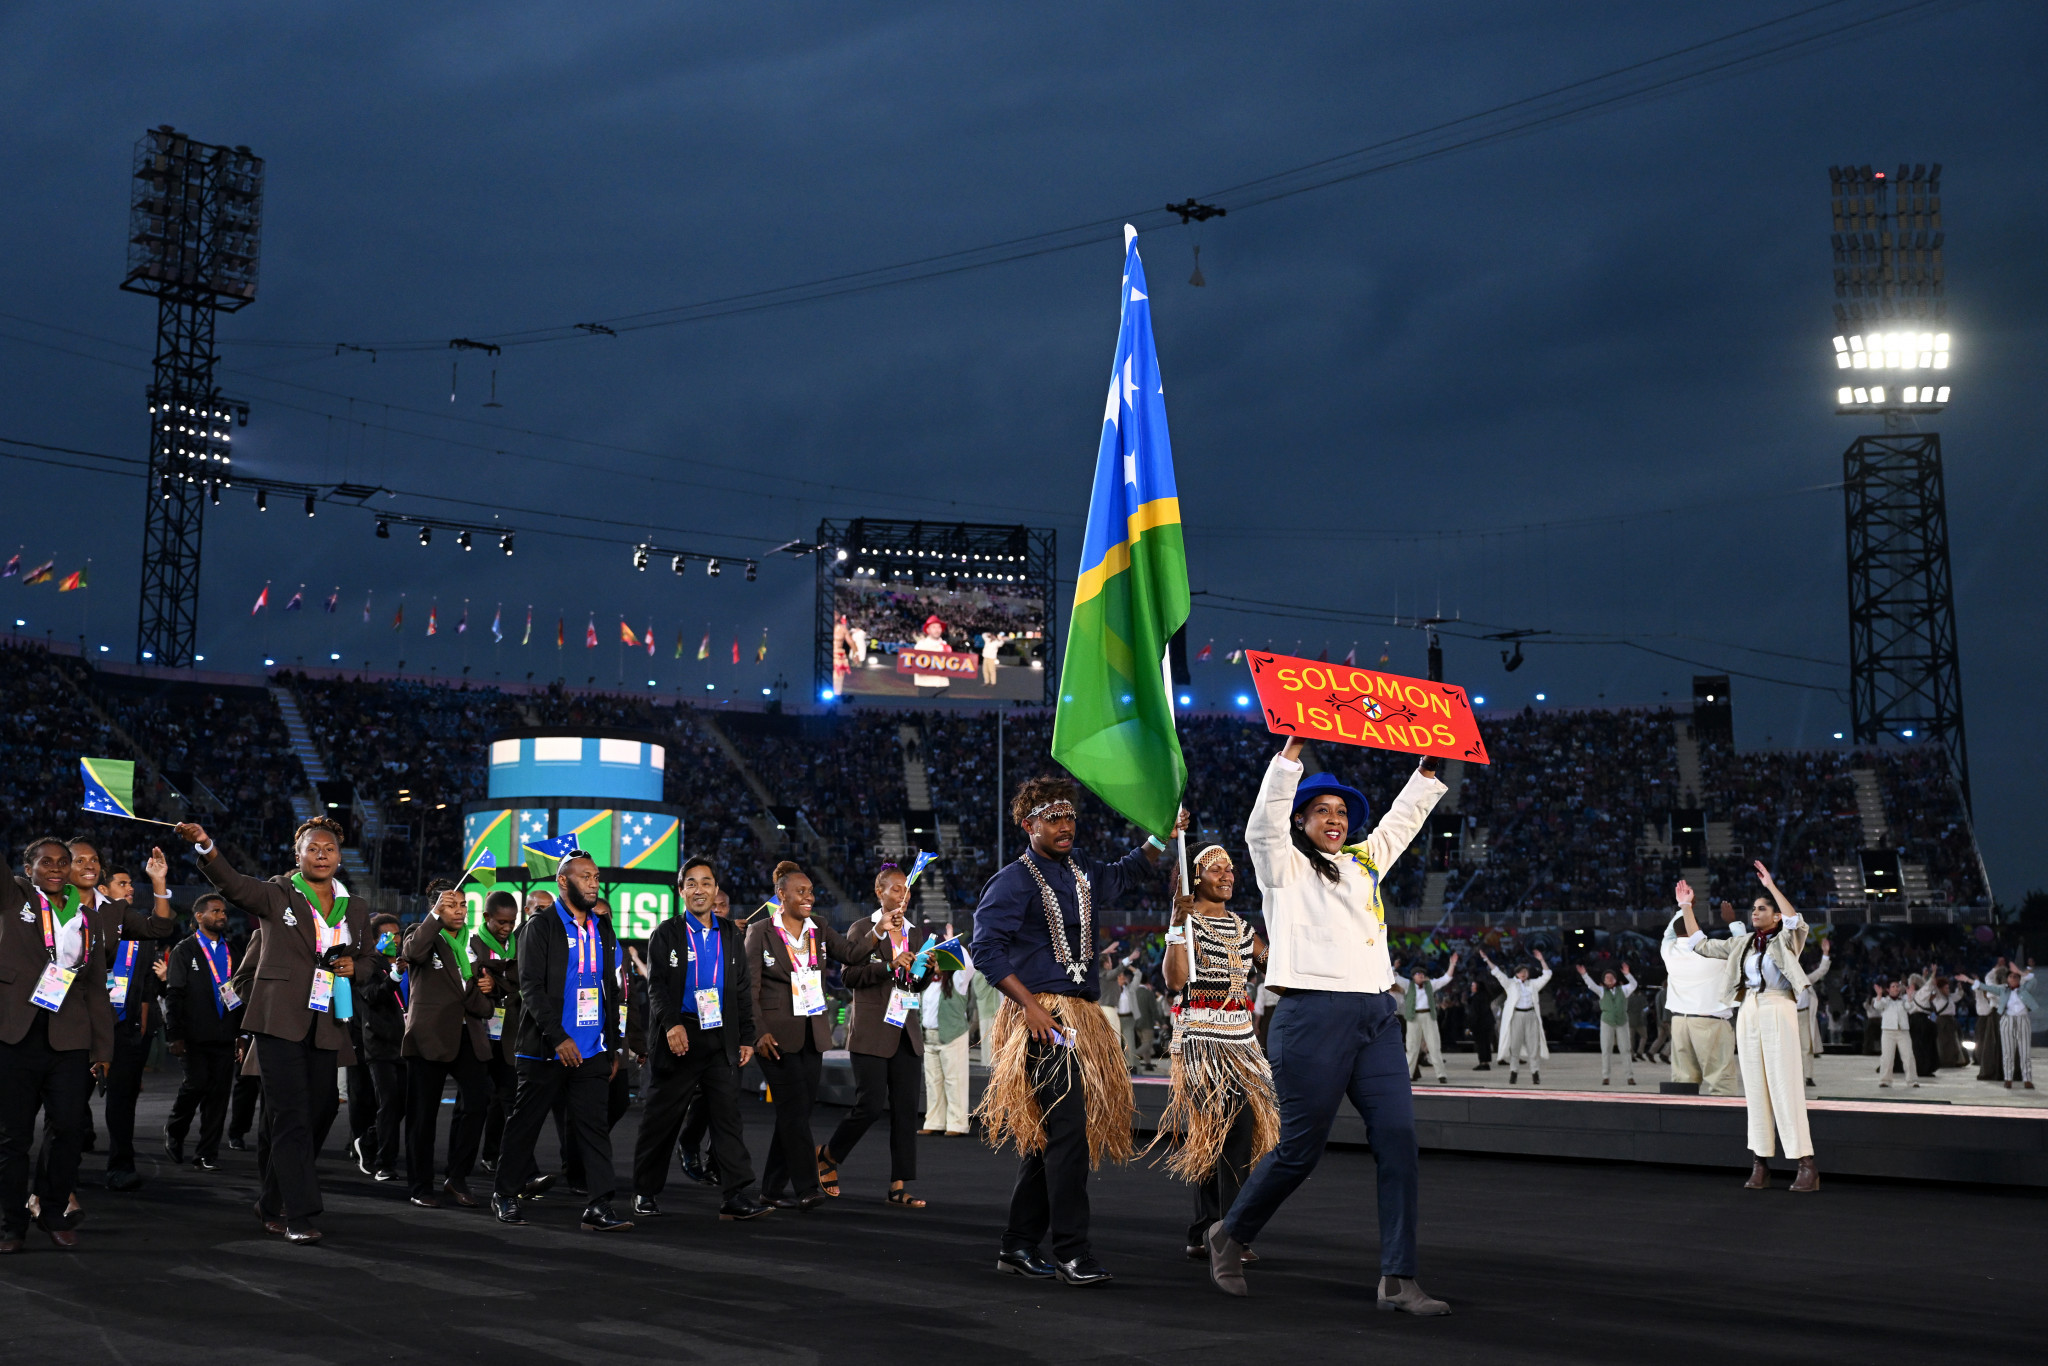 Solomon Islands 2023 inviting tenders for uniforms at Pacific Games